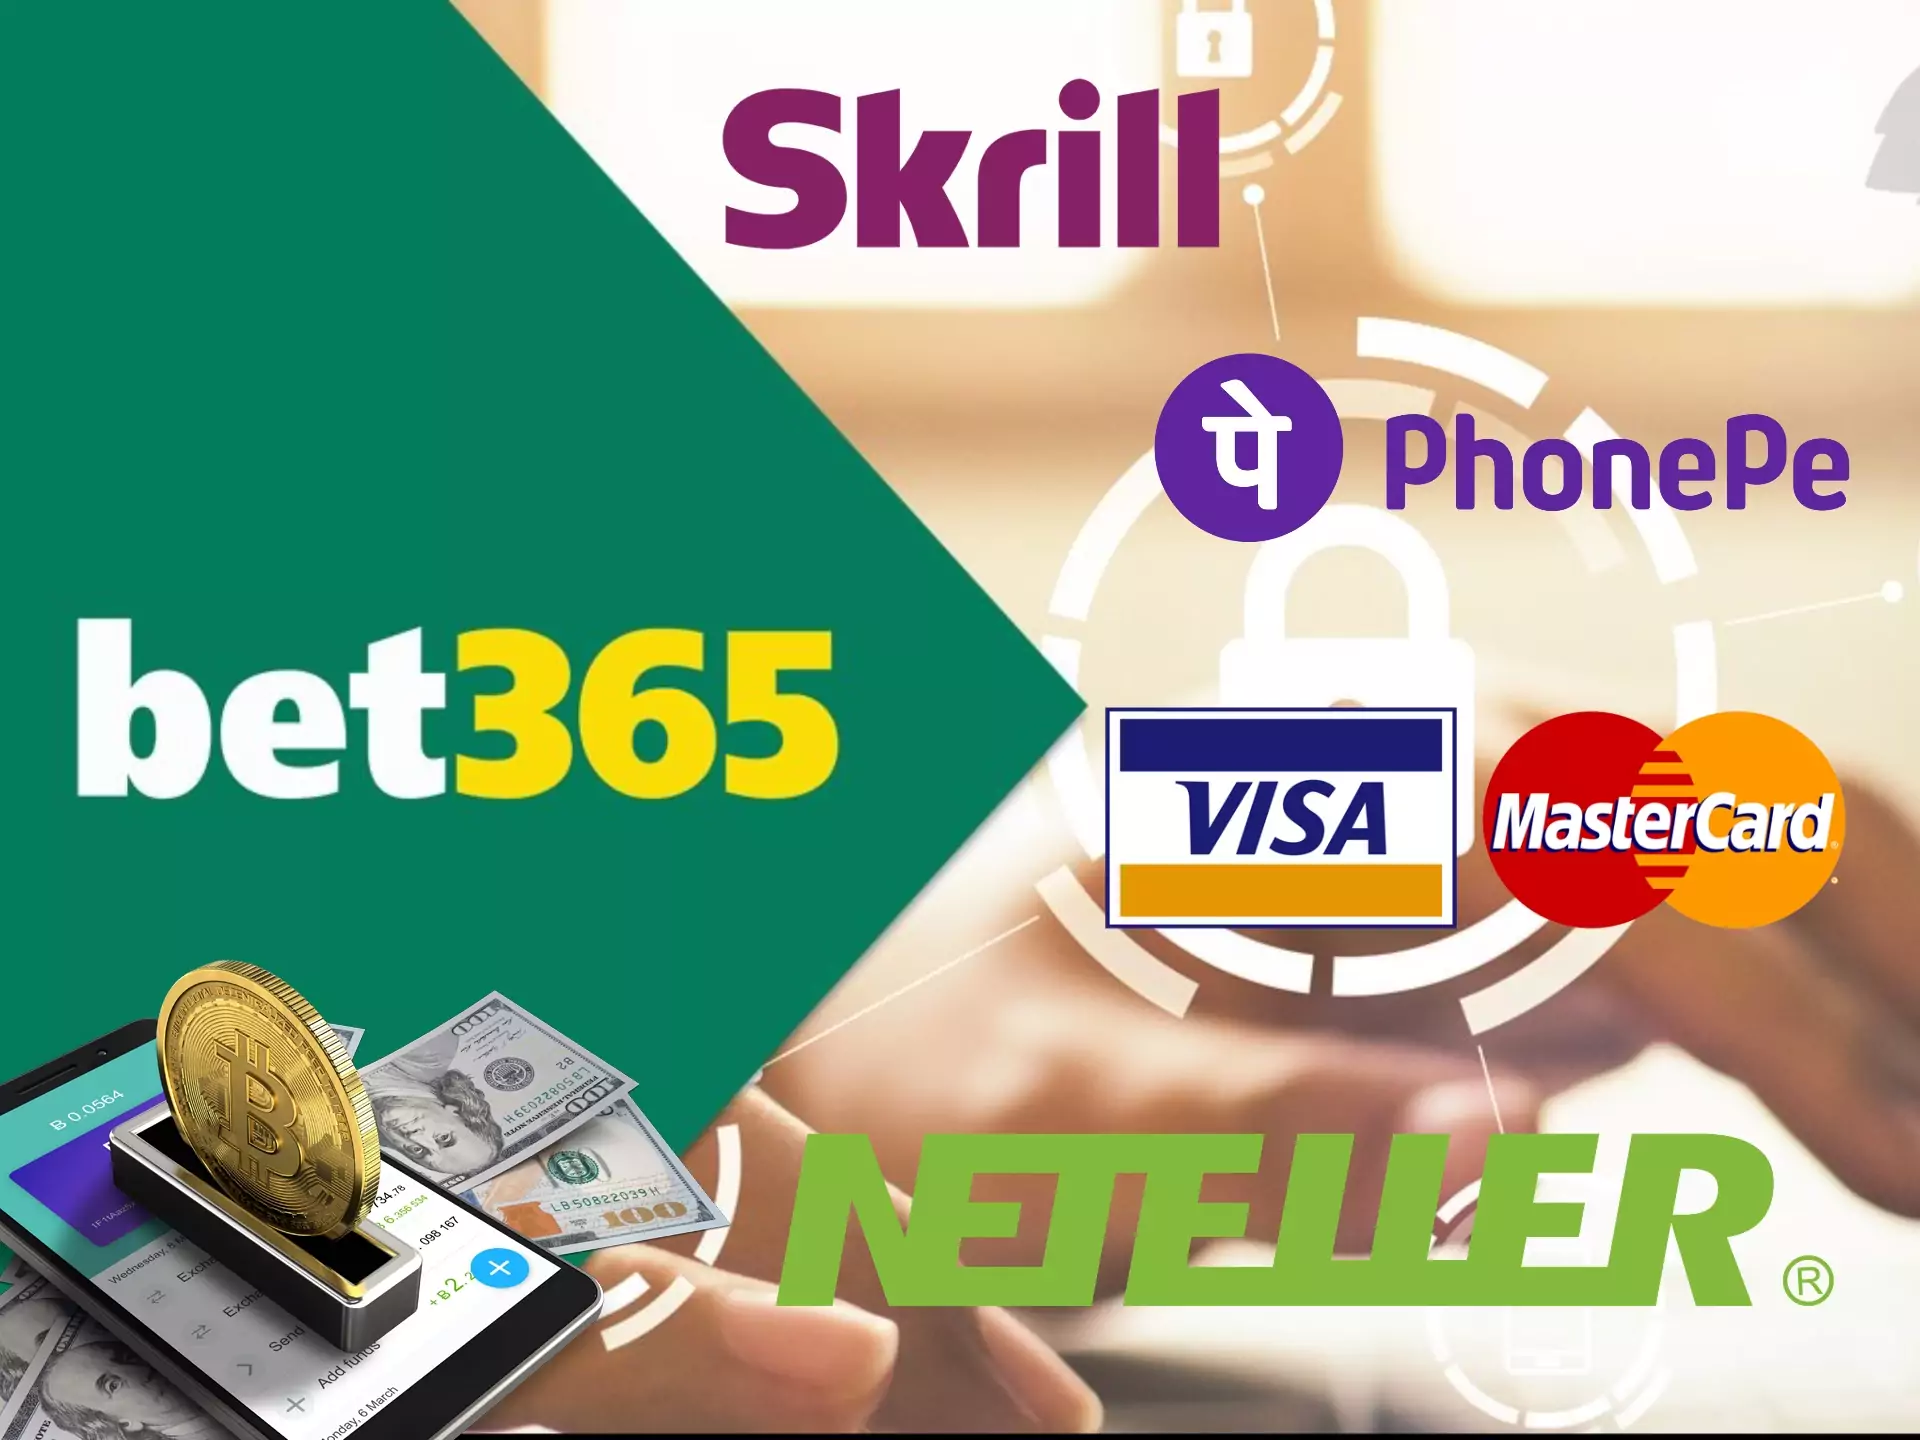 Most of the popular payment systems in India are available at bet365.